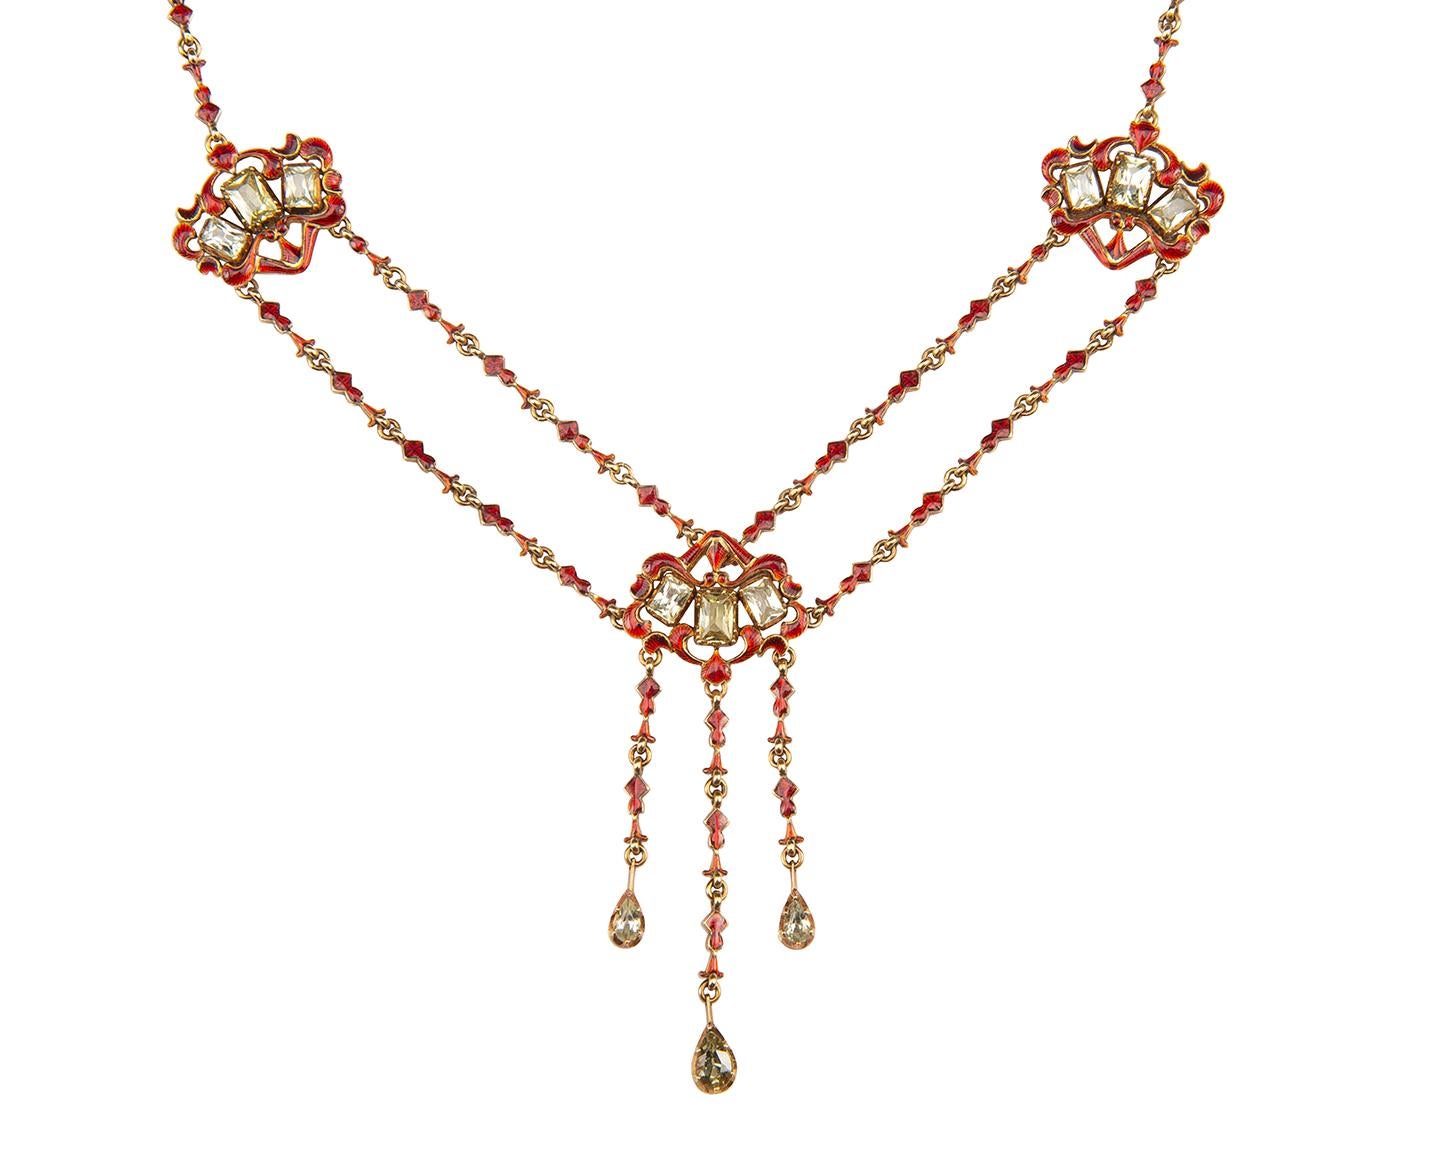 Carlo and Arthur Giuliano
Renaissance Style Chrysolite Enameled Necklace with original box
England (London), c. 1895
Gold, enamel, chrysolite 
Weight 21.4 gr.; Chain 39.8 cm.

Gold necklace with red translucent enamel. The centerpiece is formed of